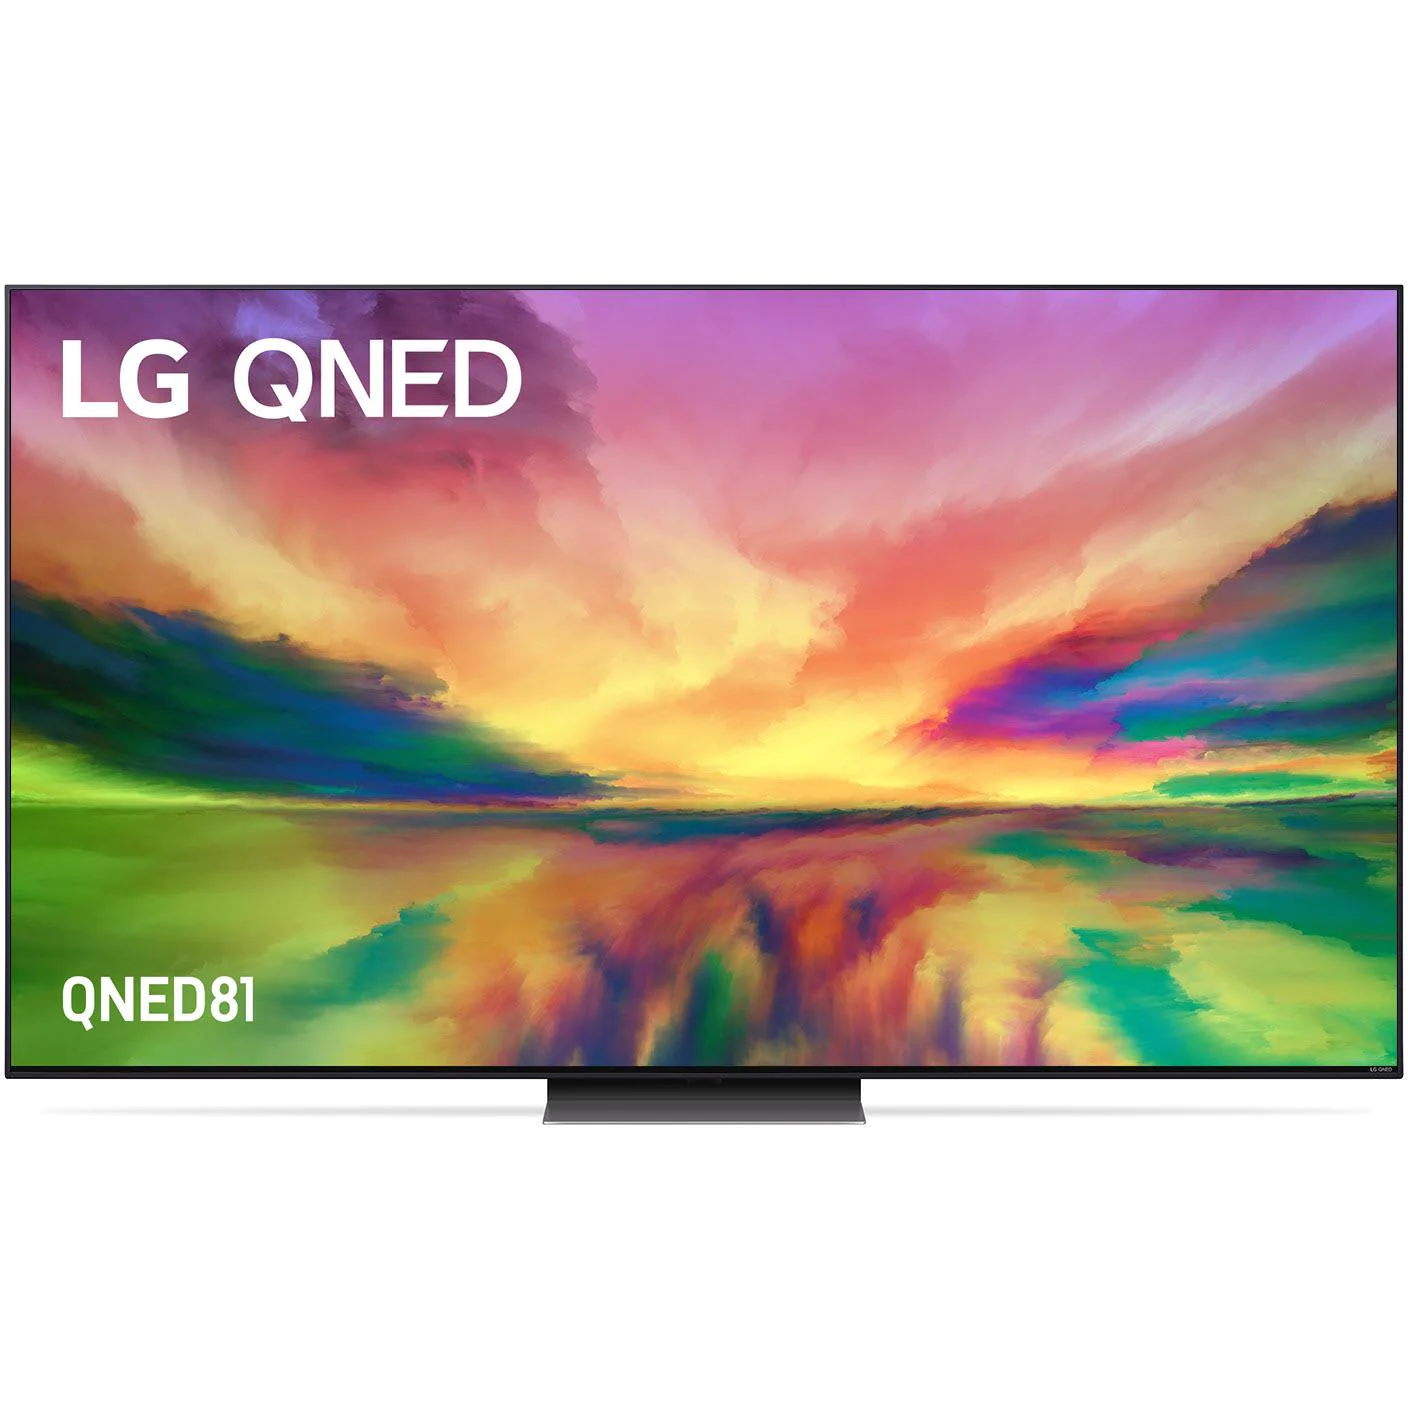 LG 65 inch QNED81 4K